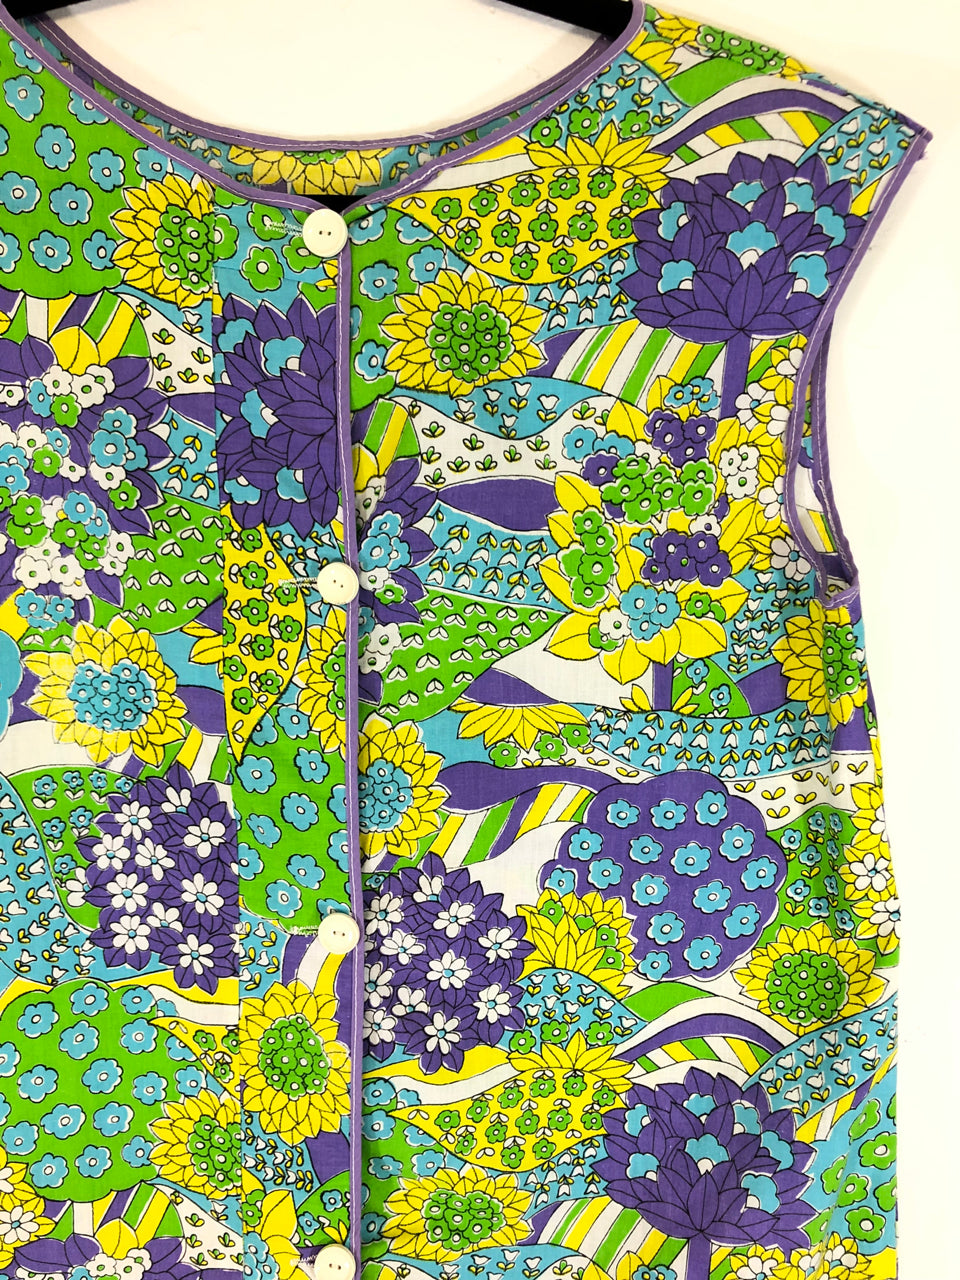 70s Psychedelic Apron Top